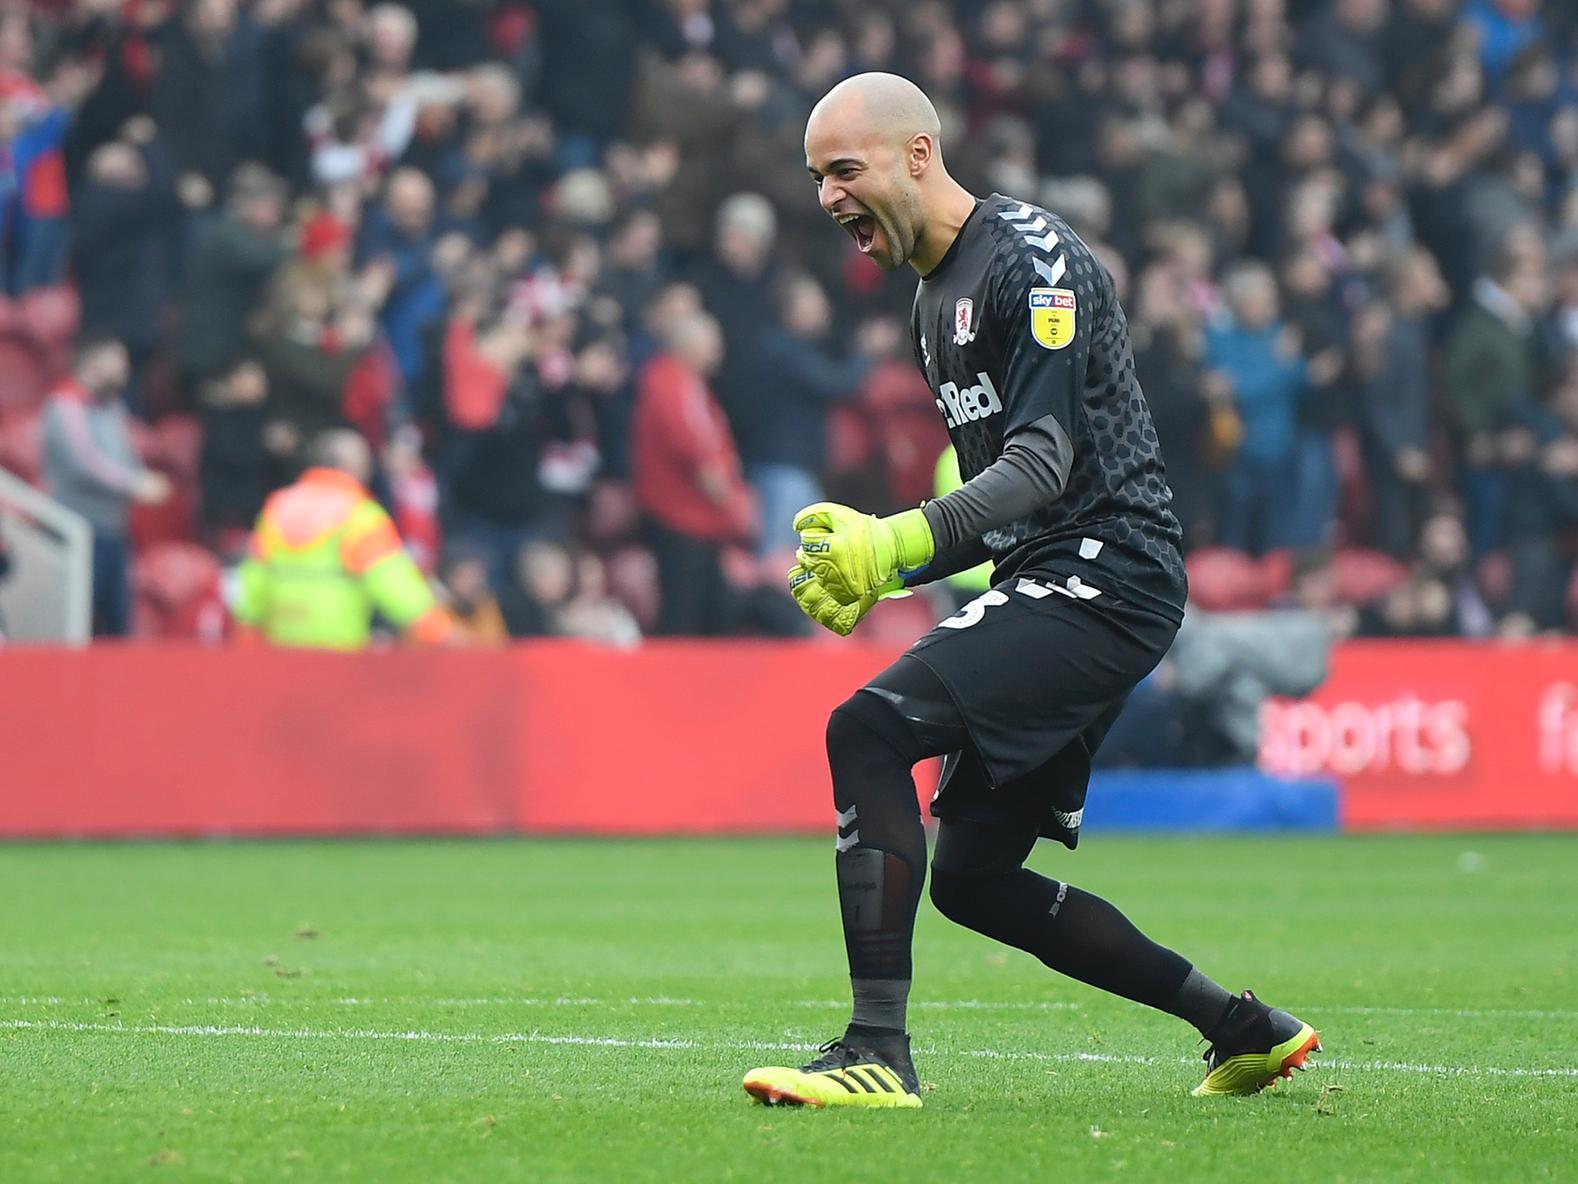 West Ham United are said to have agreed a 4m deal for Middlesbrough goalkeeper Darren Randolph, as new boss David Moyes looks to save the Hammers from relegation. (Guardian)